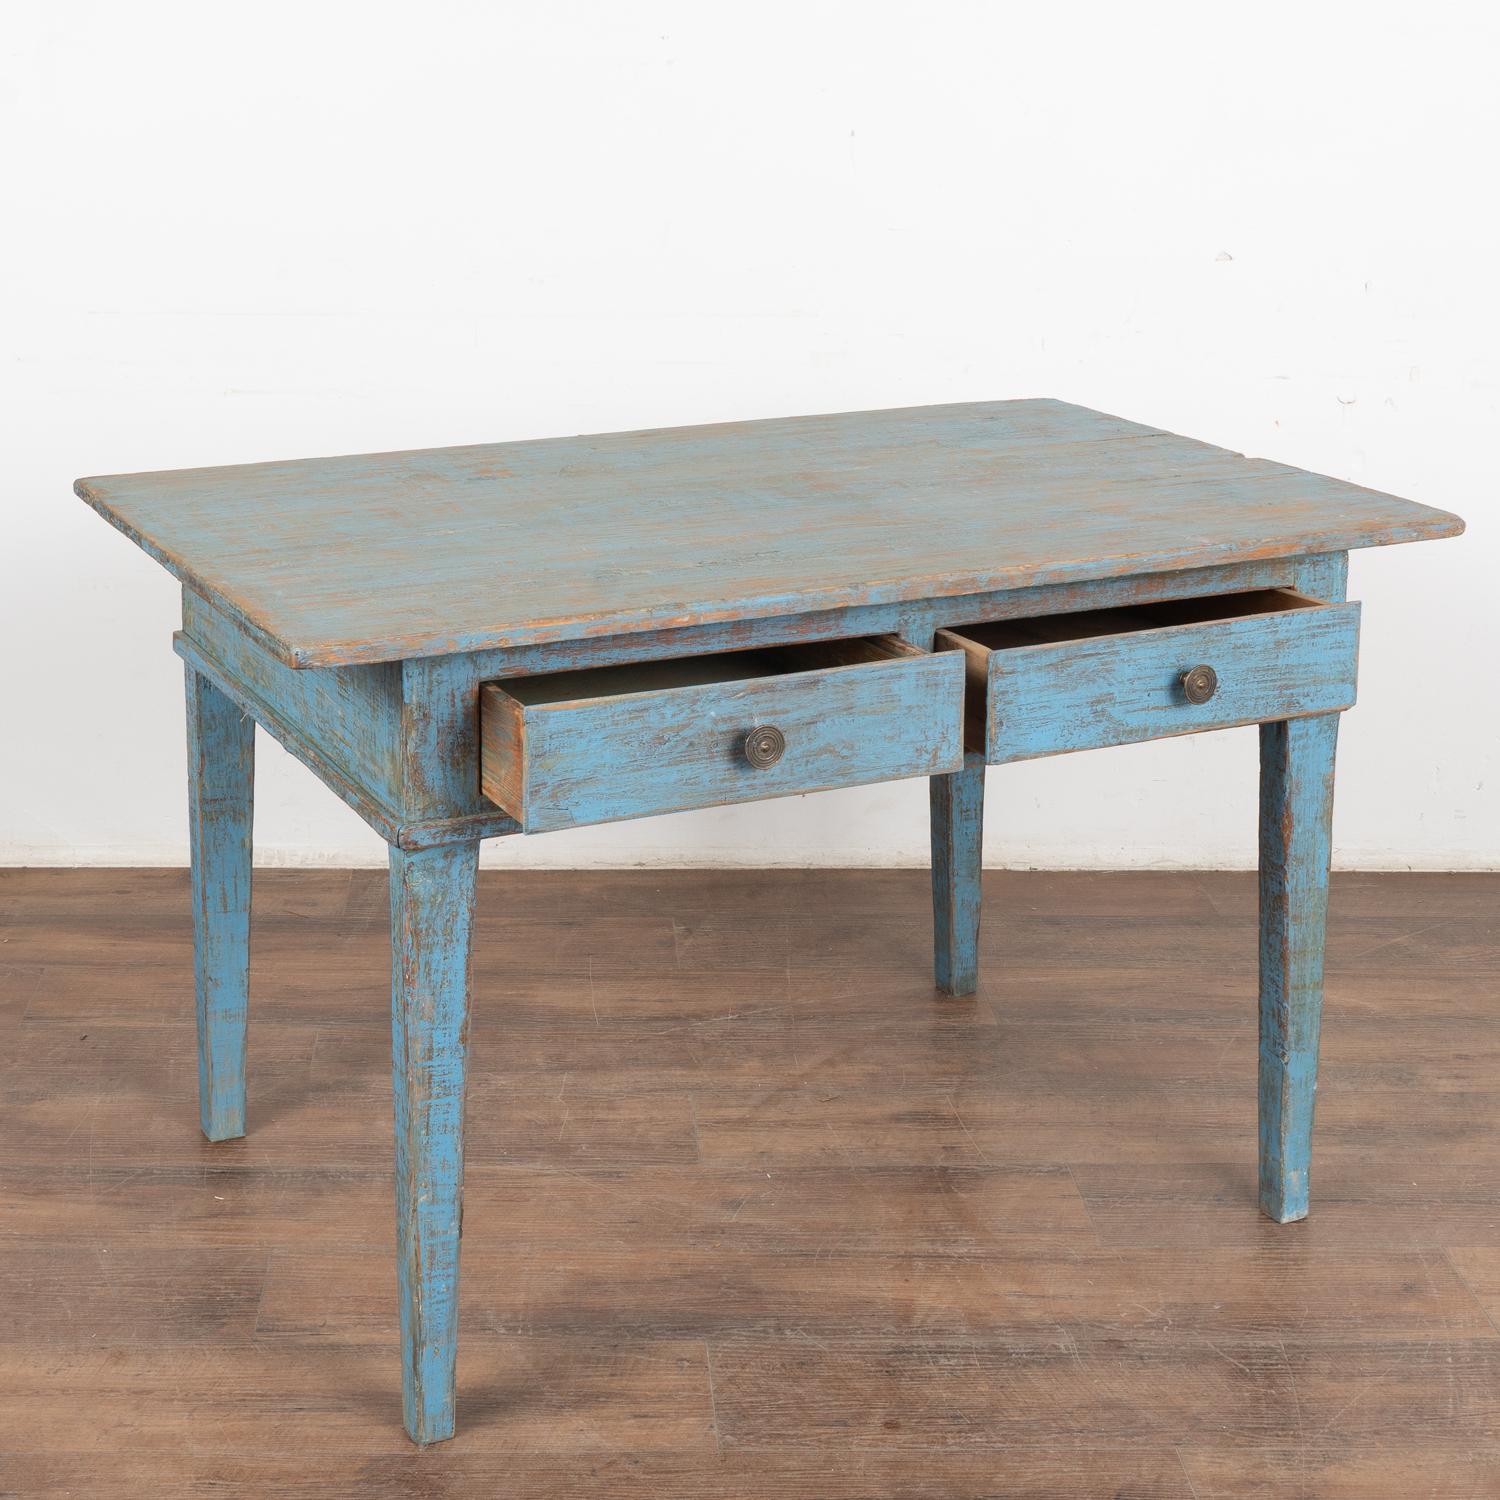 Country Blue Painted Pine Farm Table Writing Table With 2 Drawers, Sweden circa 1860-80 For Sale